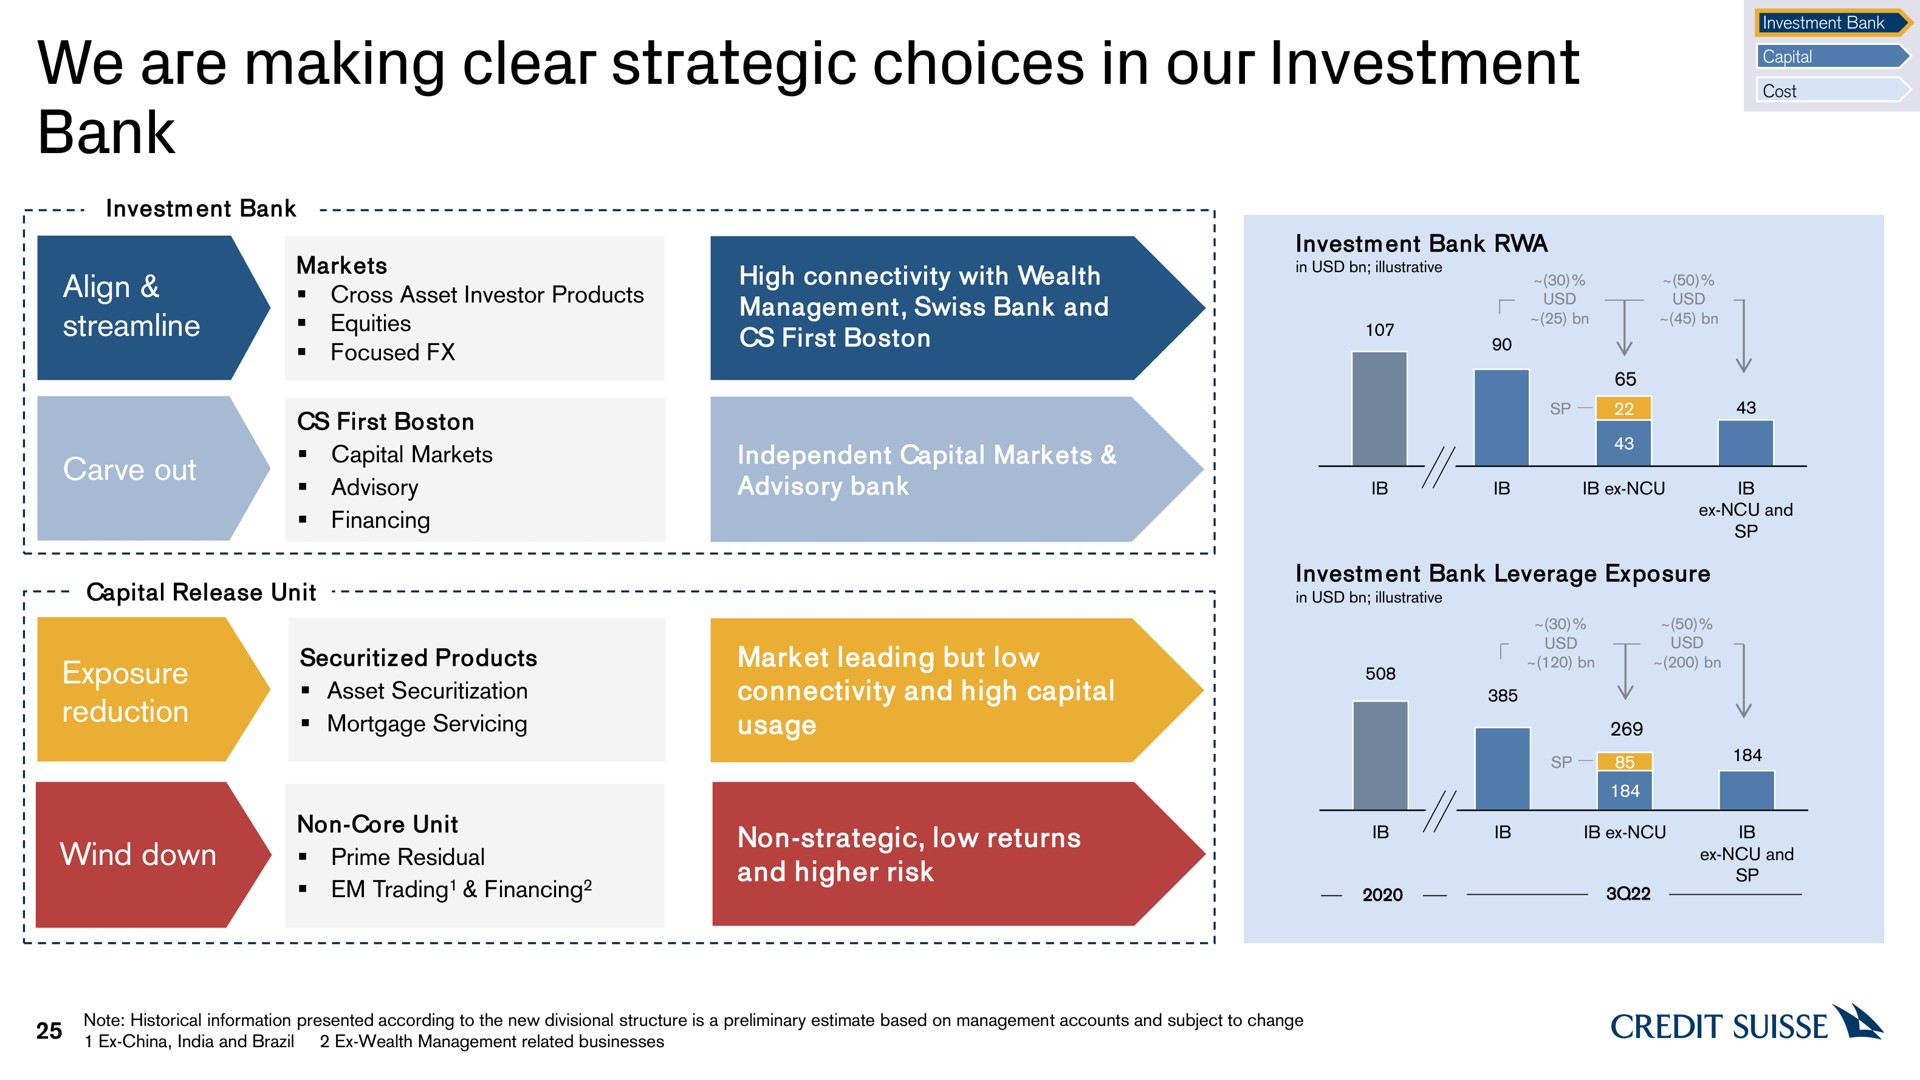 we are making clear strategic choices in our investment bank | Credit Suisse